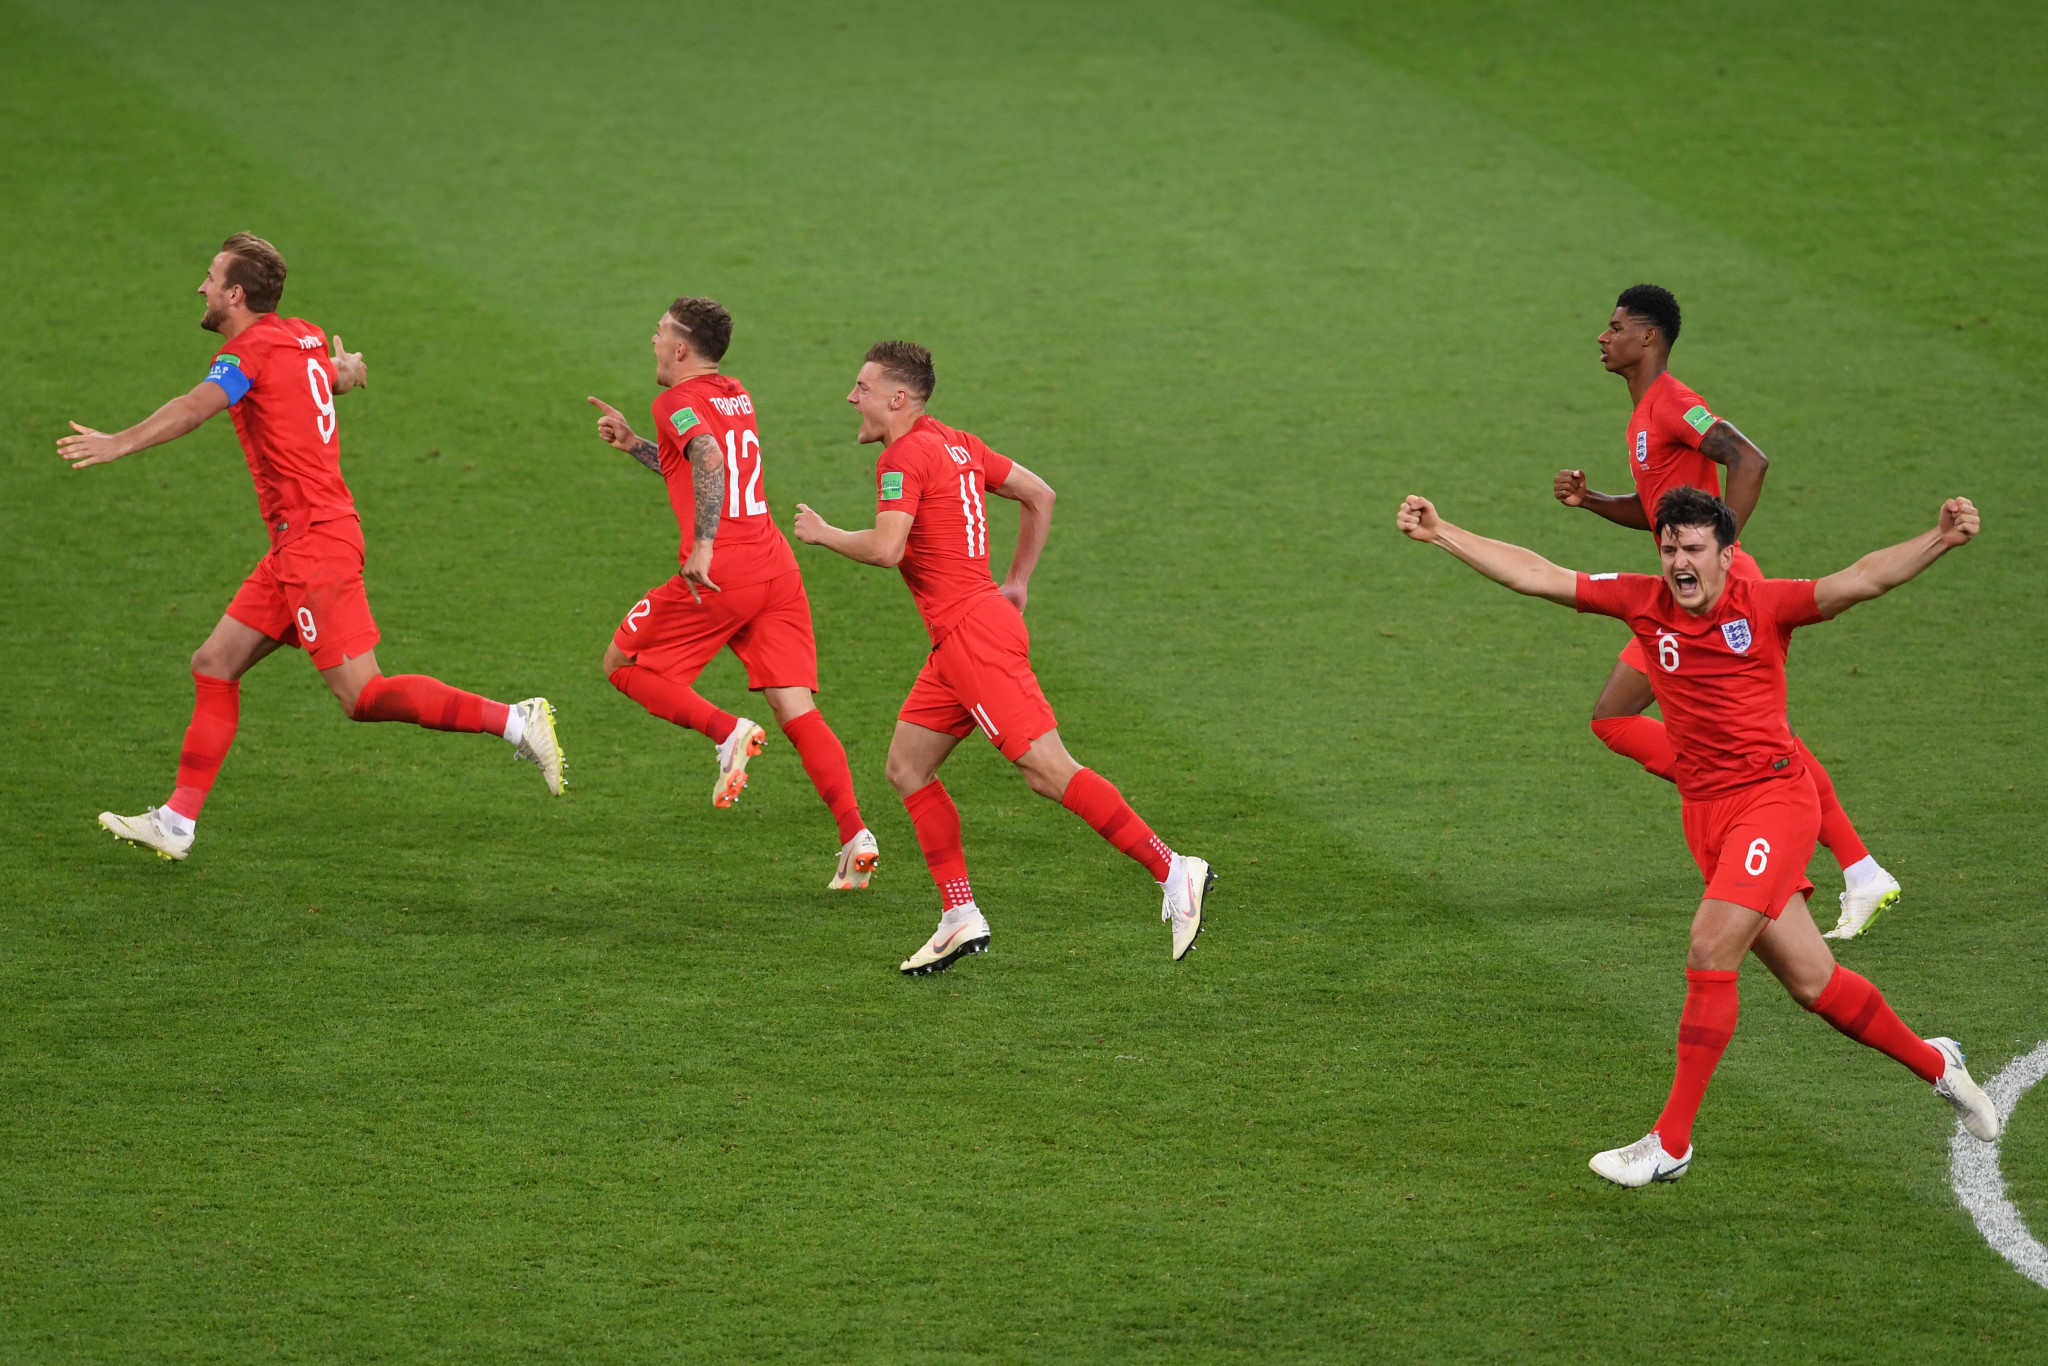 England win first World Cup penalty shoot-out to set up FIFA World Cup quarter-final meeting with Sweden